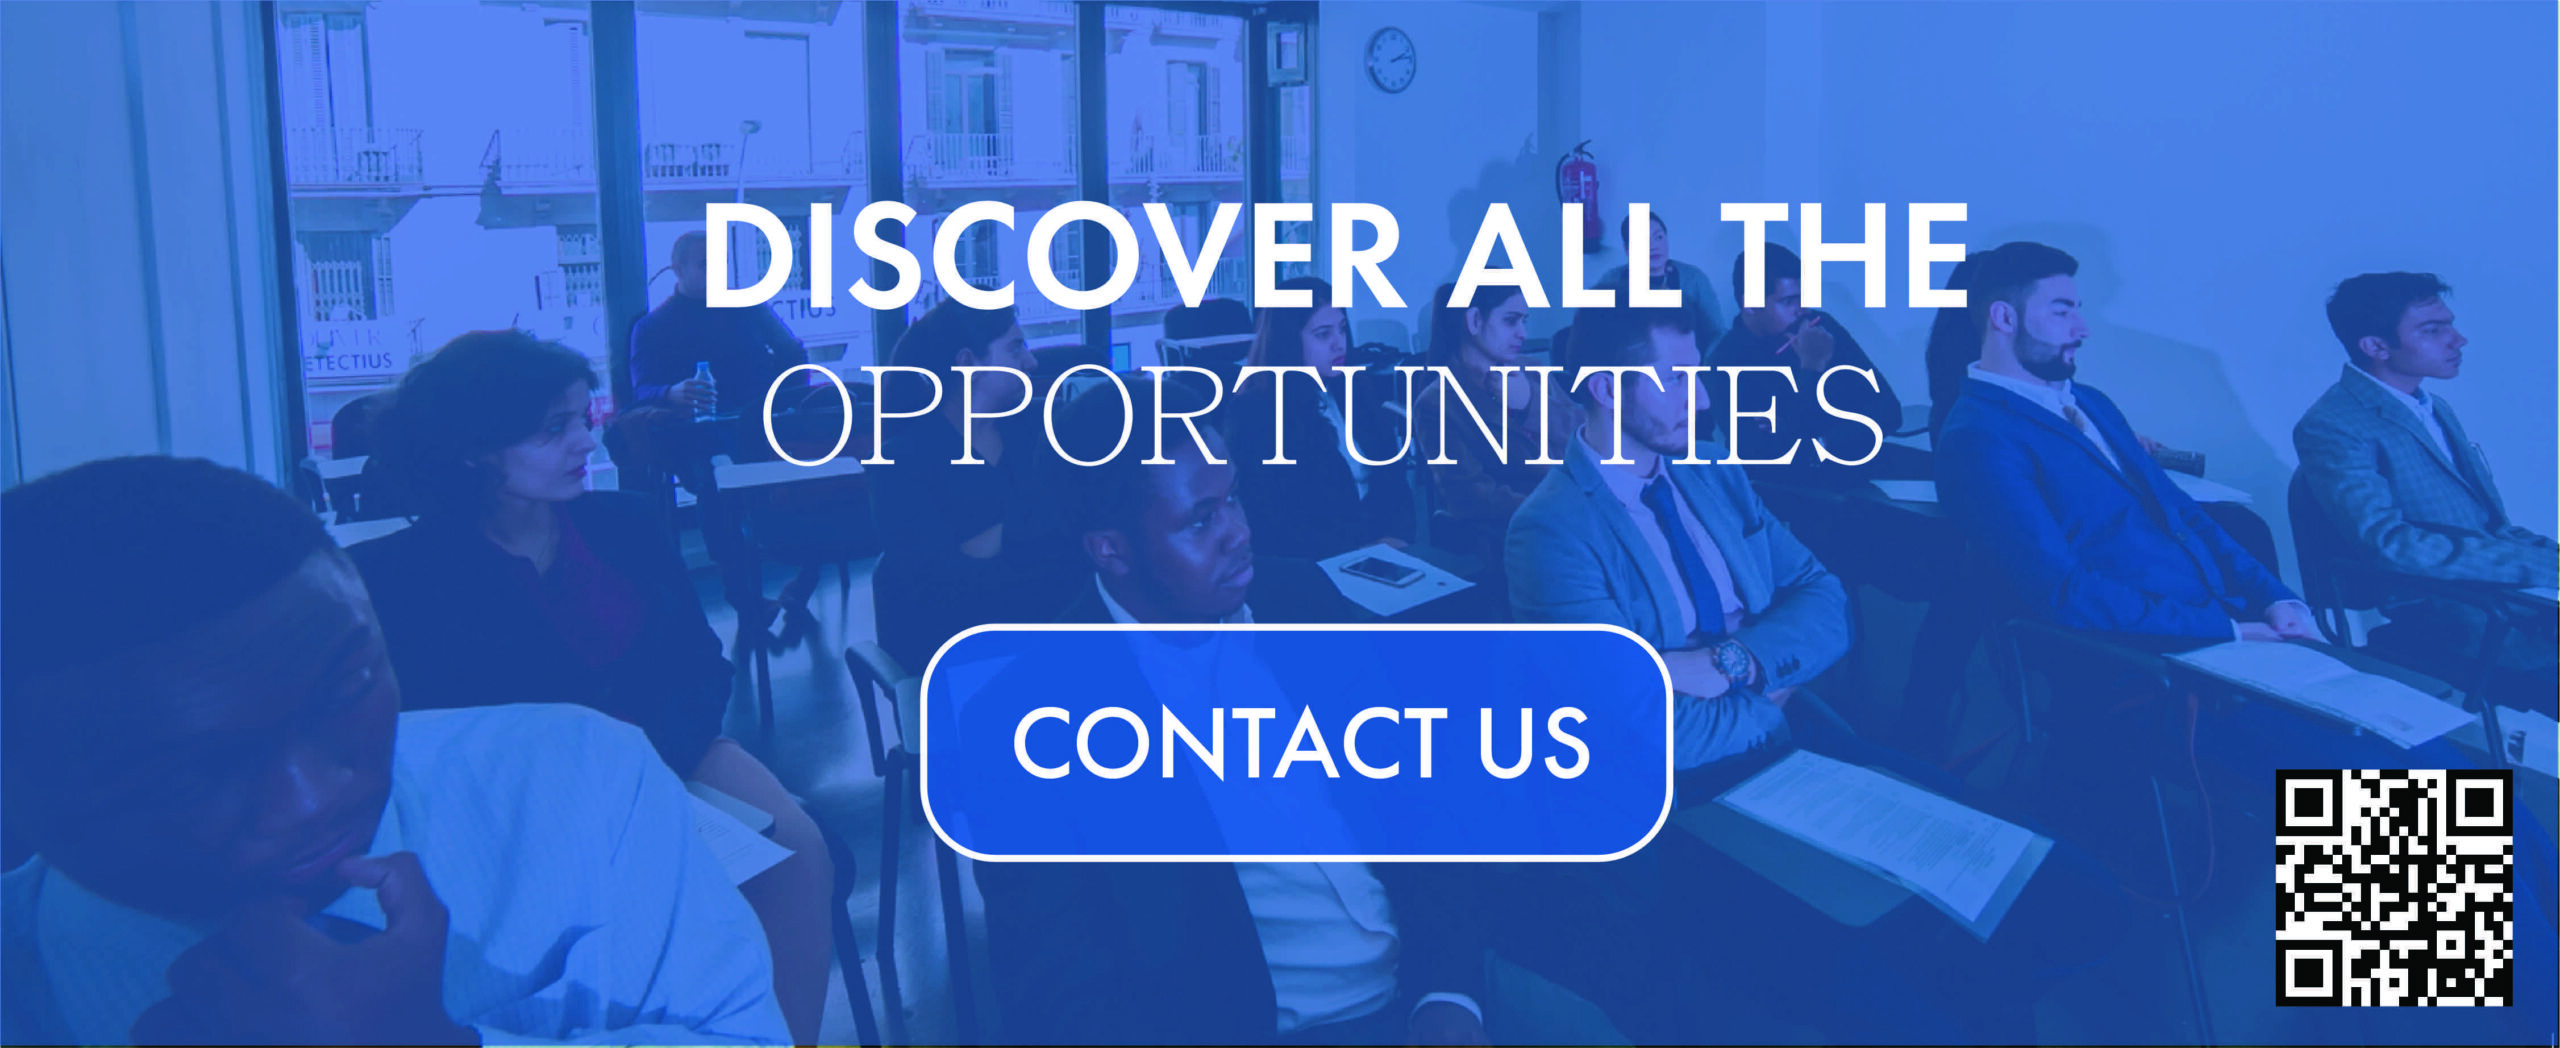 Discover All The Opportunities-Contact Us